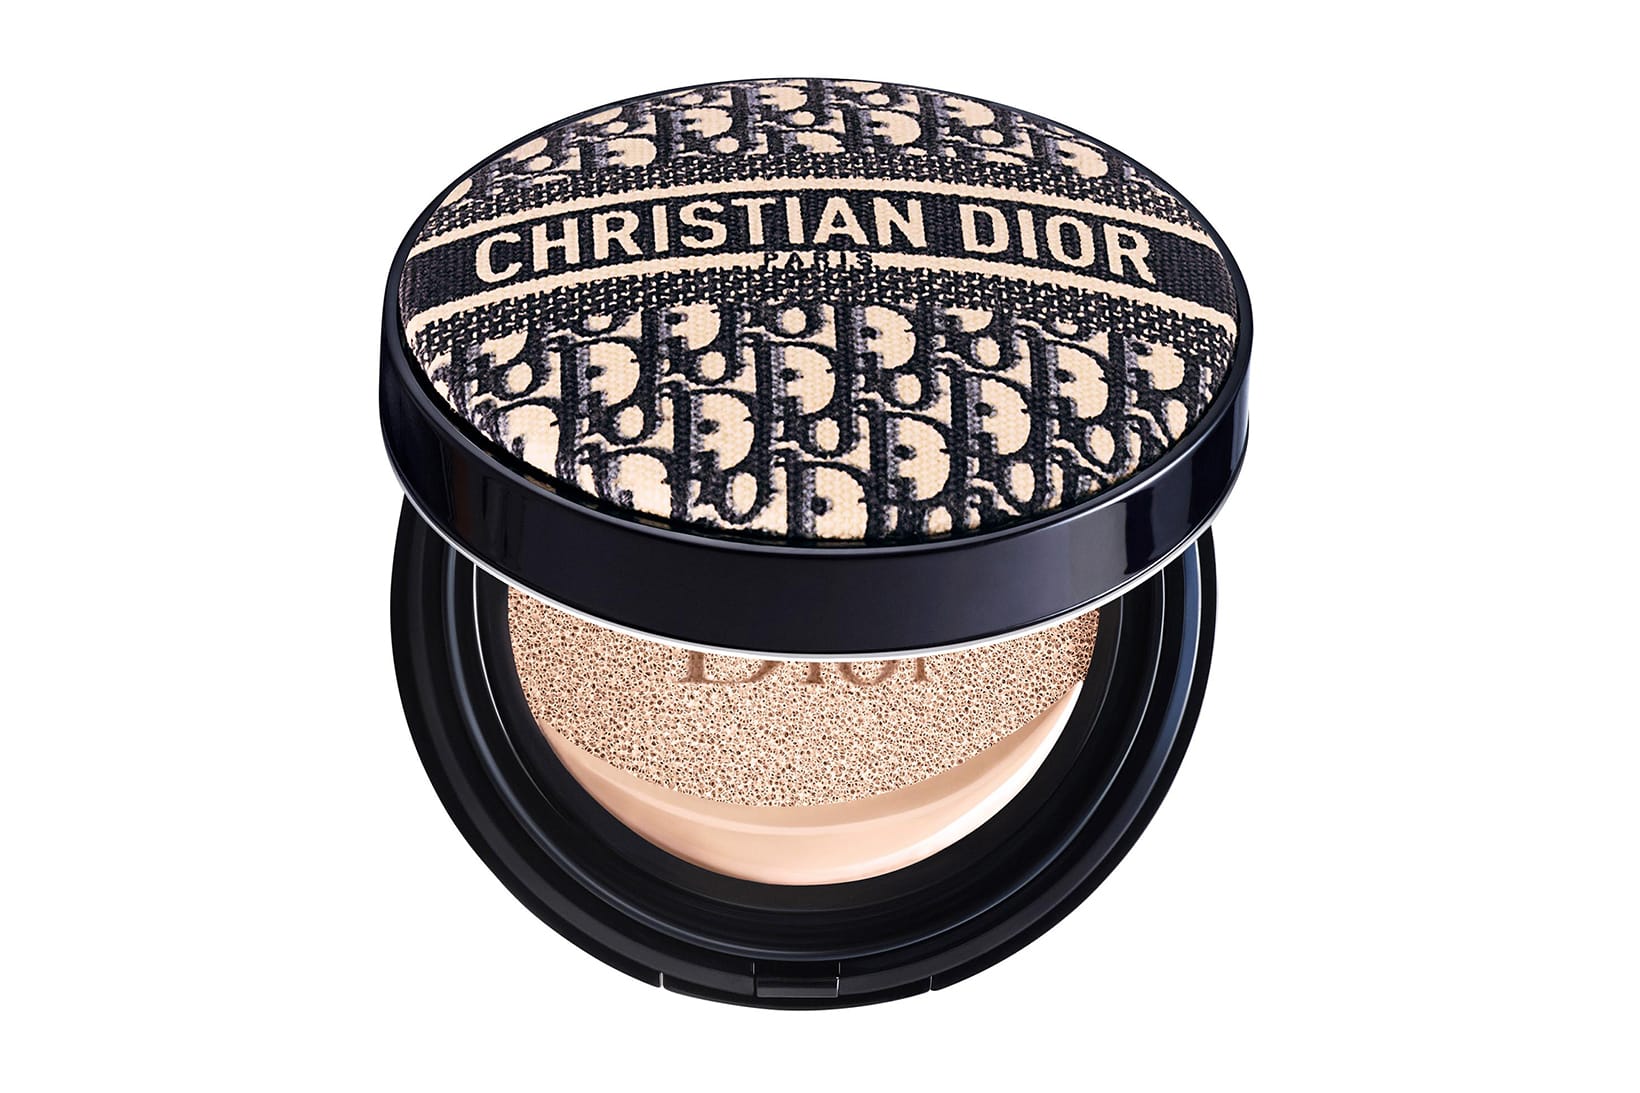 10 Best Cushion Foundation Compacts in 